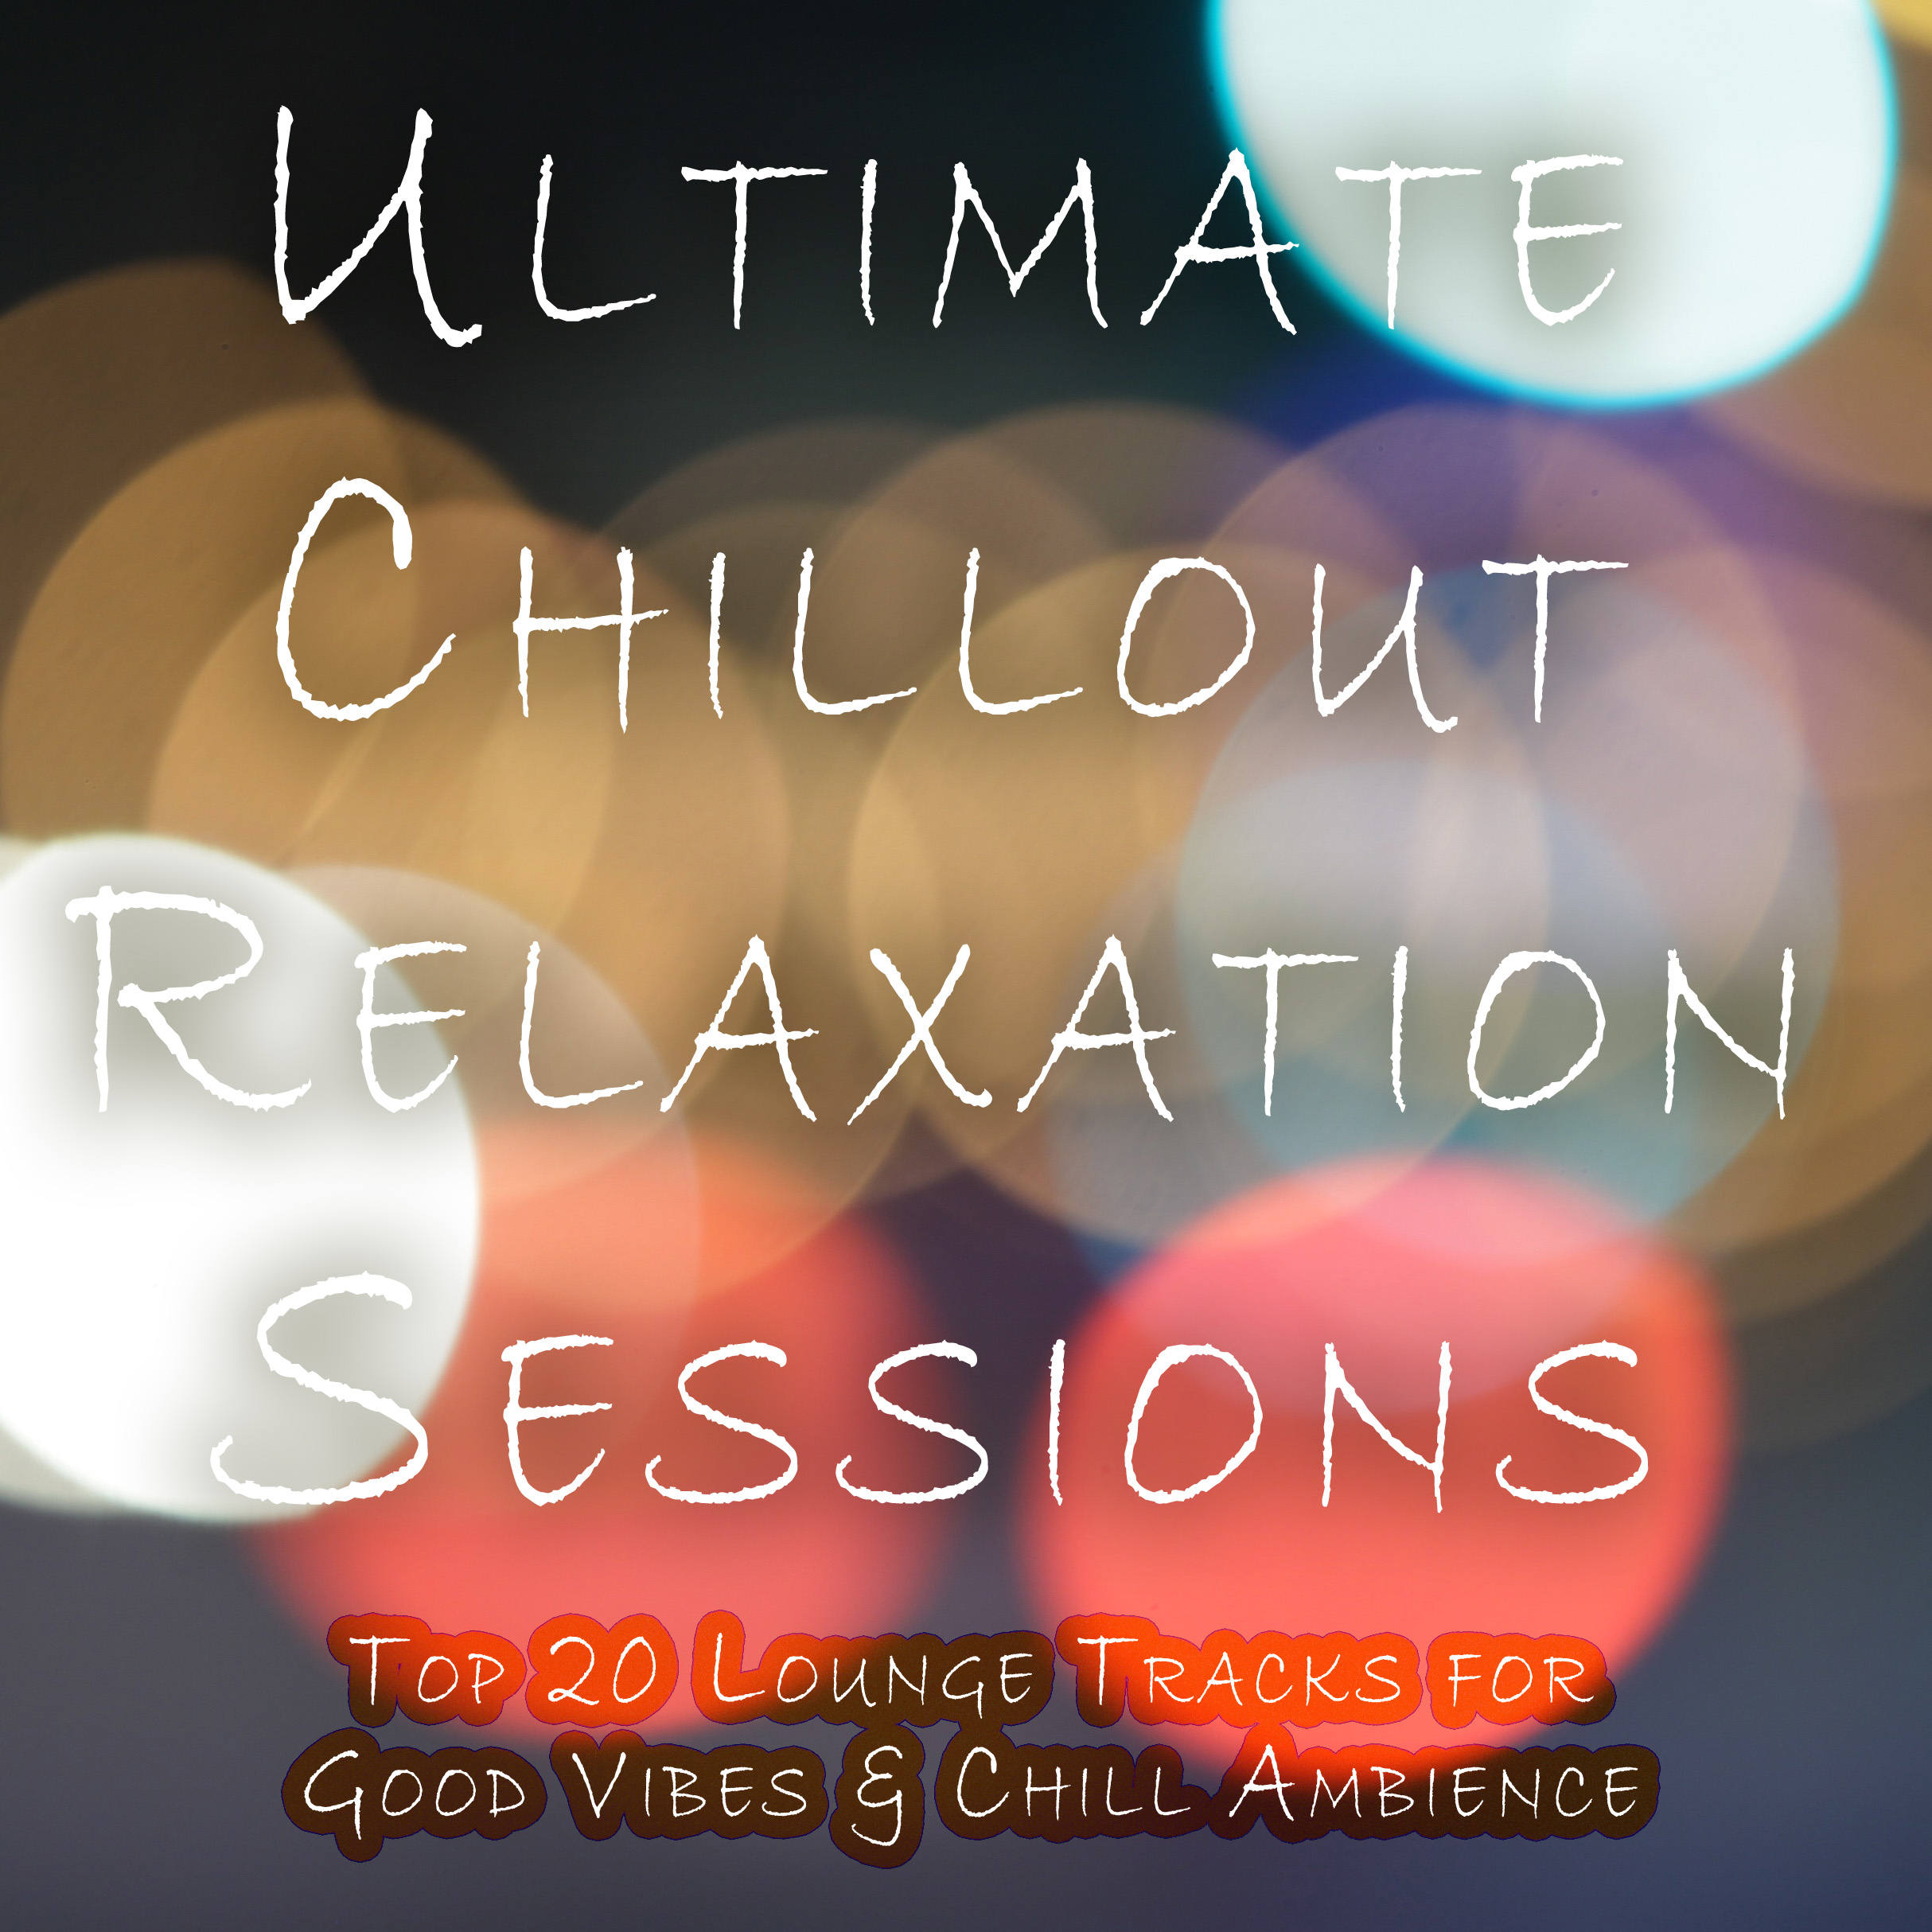 Ultimate Chillout Relaxation Sessions - Top 20 Lounge Tracks for Good Vibes, Chill Ambience, Stress-Busting Anxiety Relief, Yoga & Meditation, Relaxing Spa Sessions, Study Focus and a Zen Mood